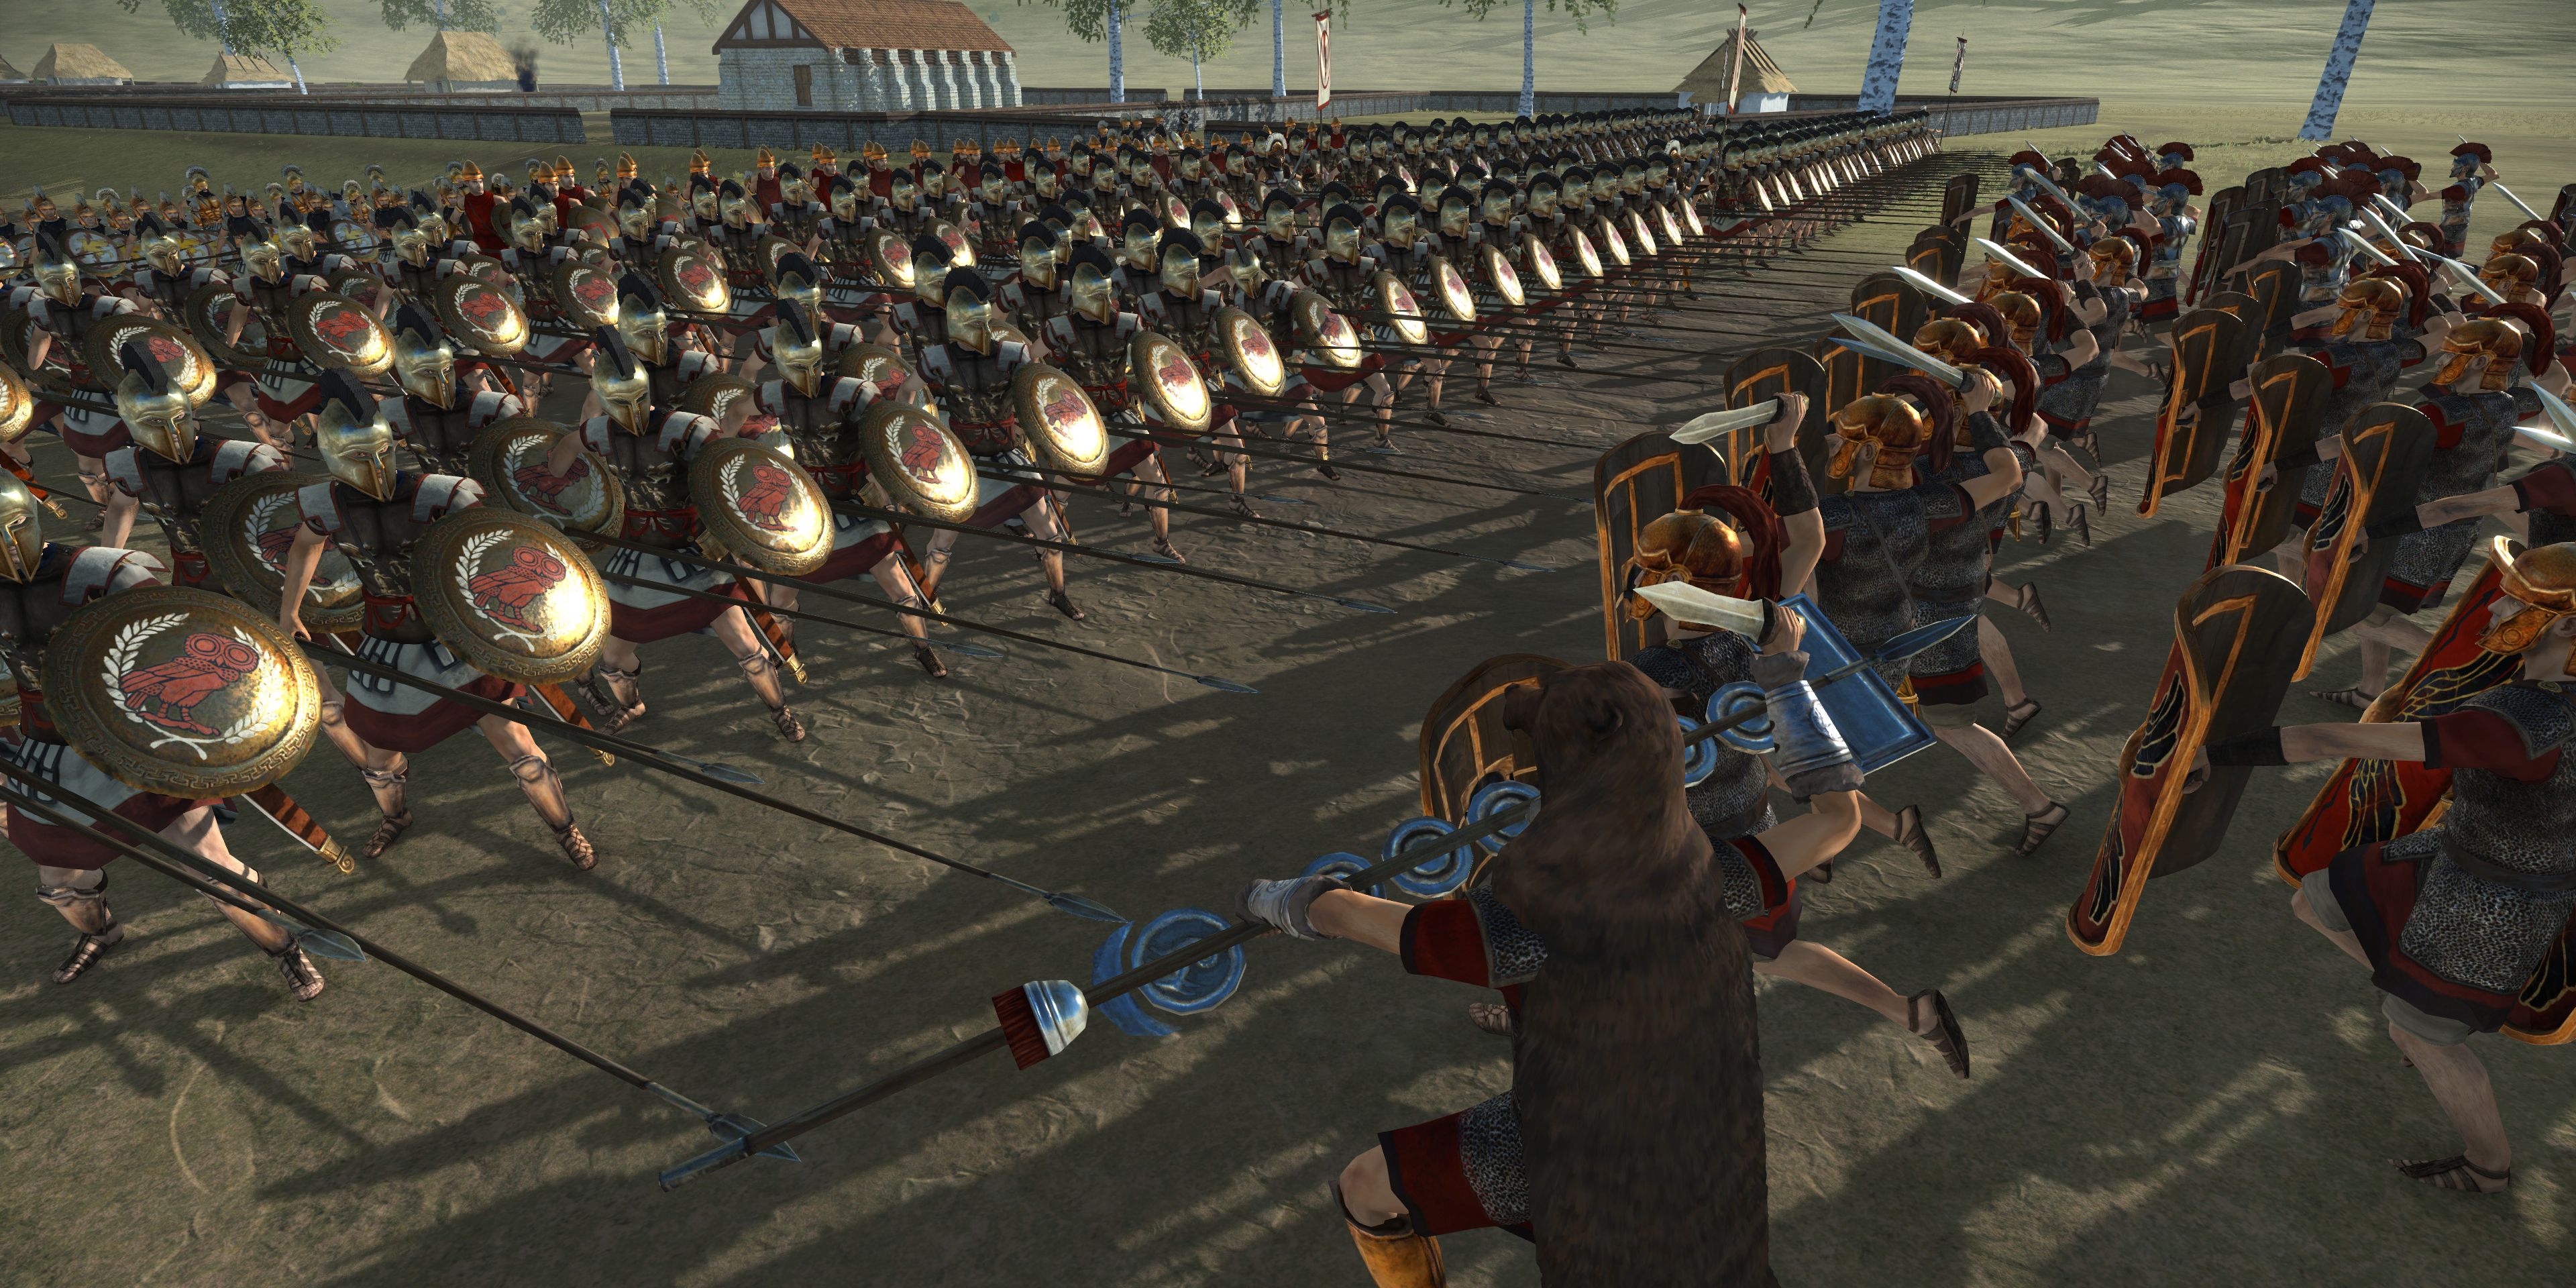 total war rome remastered changes